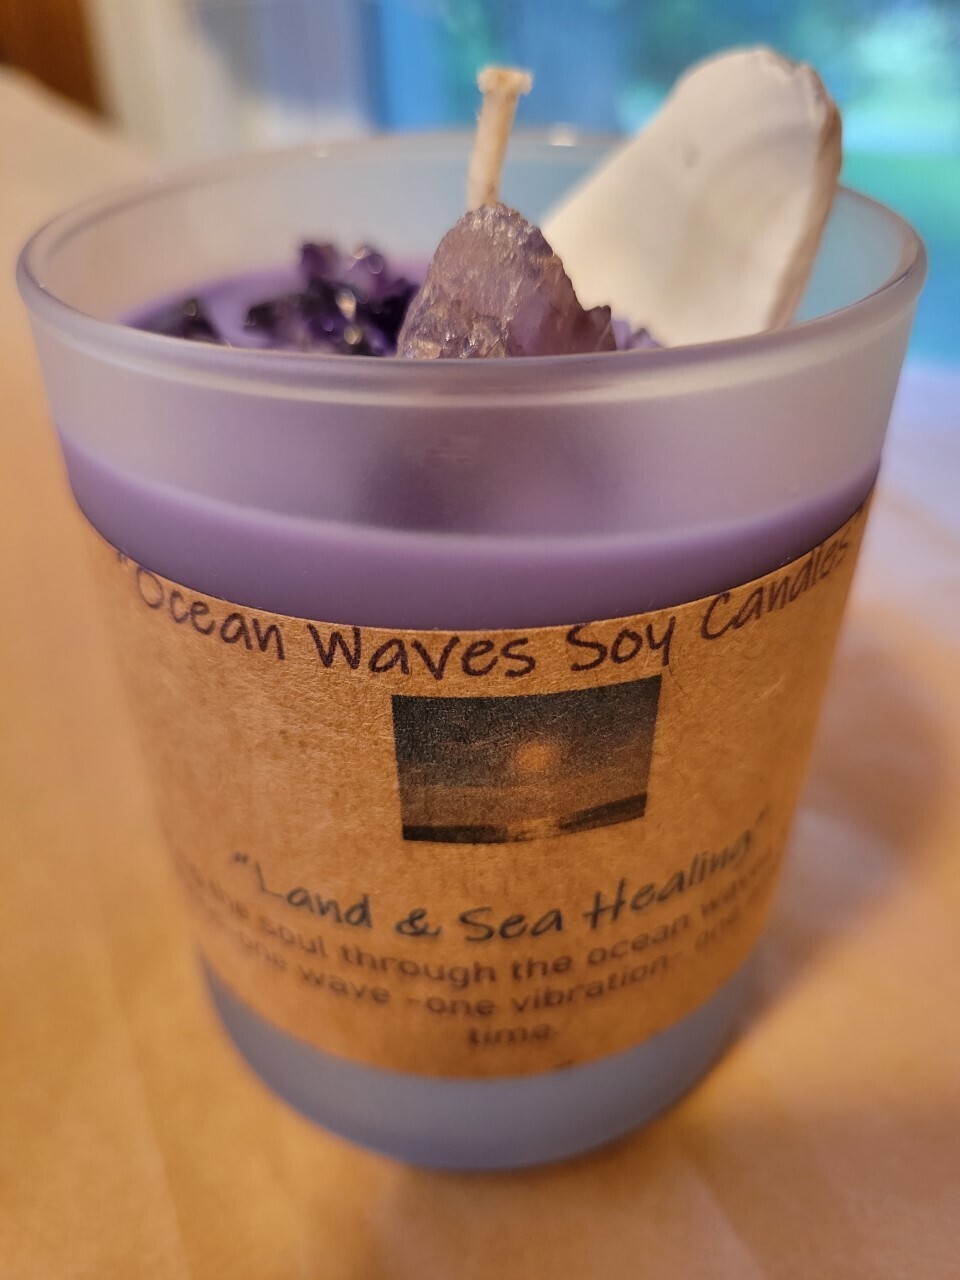 Just Judy's Journey's Ocean Waves-Land & Sea Healing Soy Candle